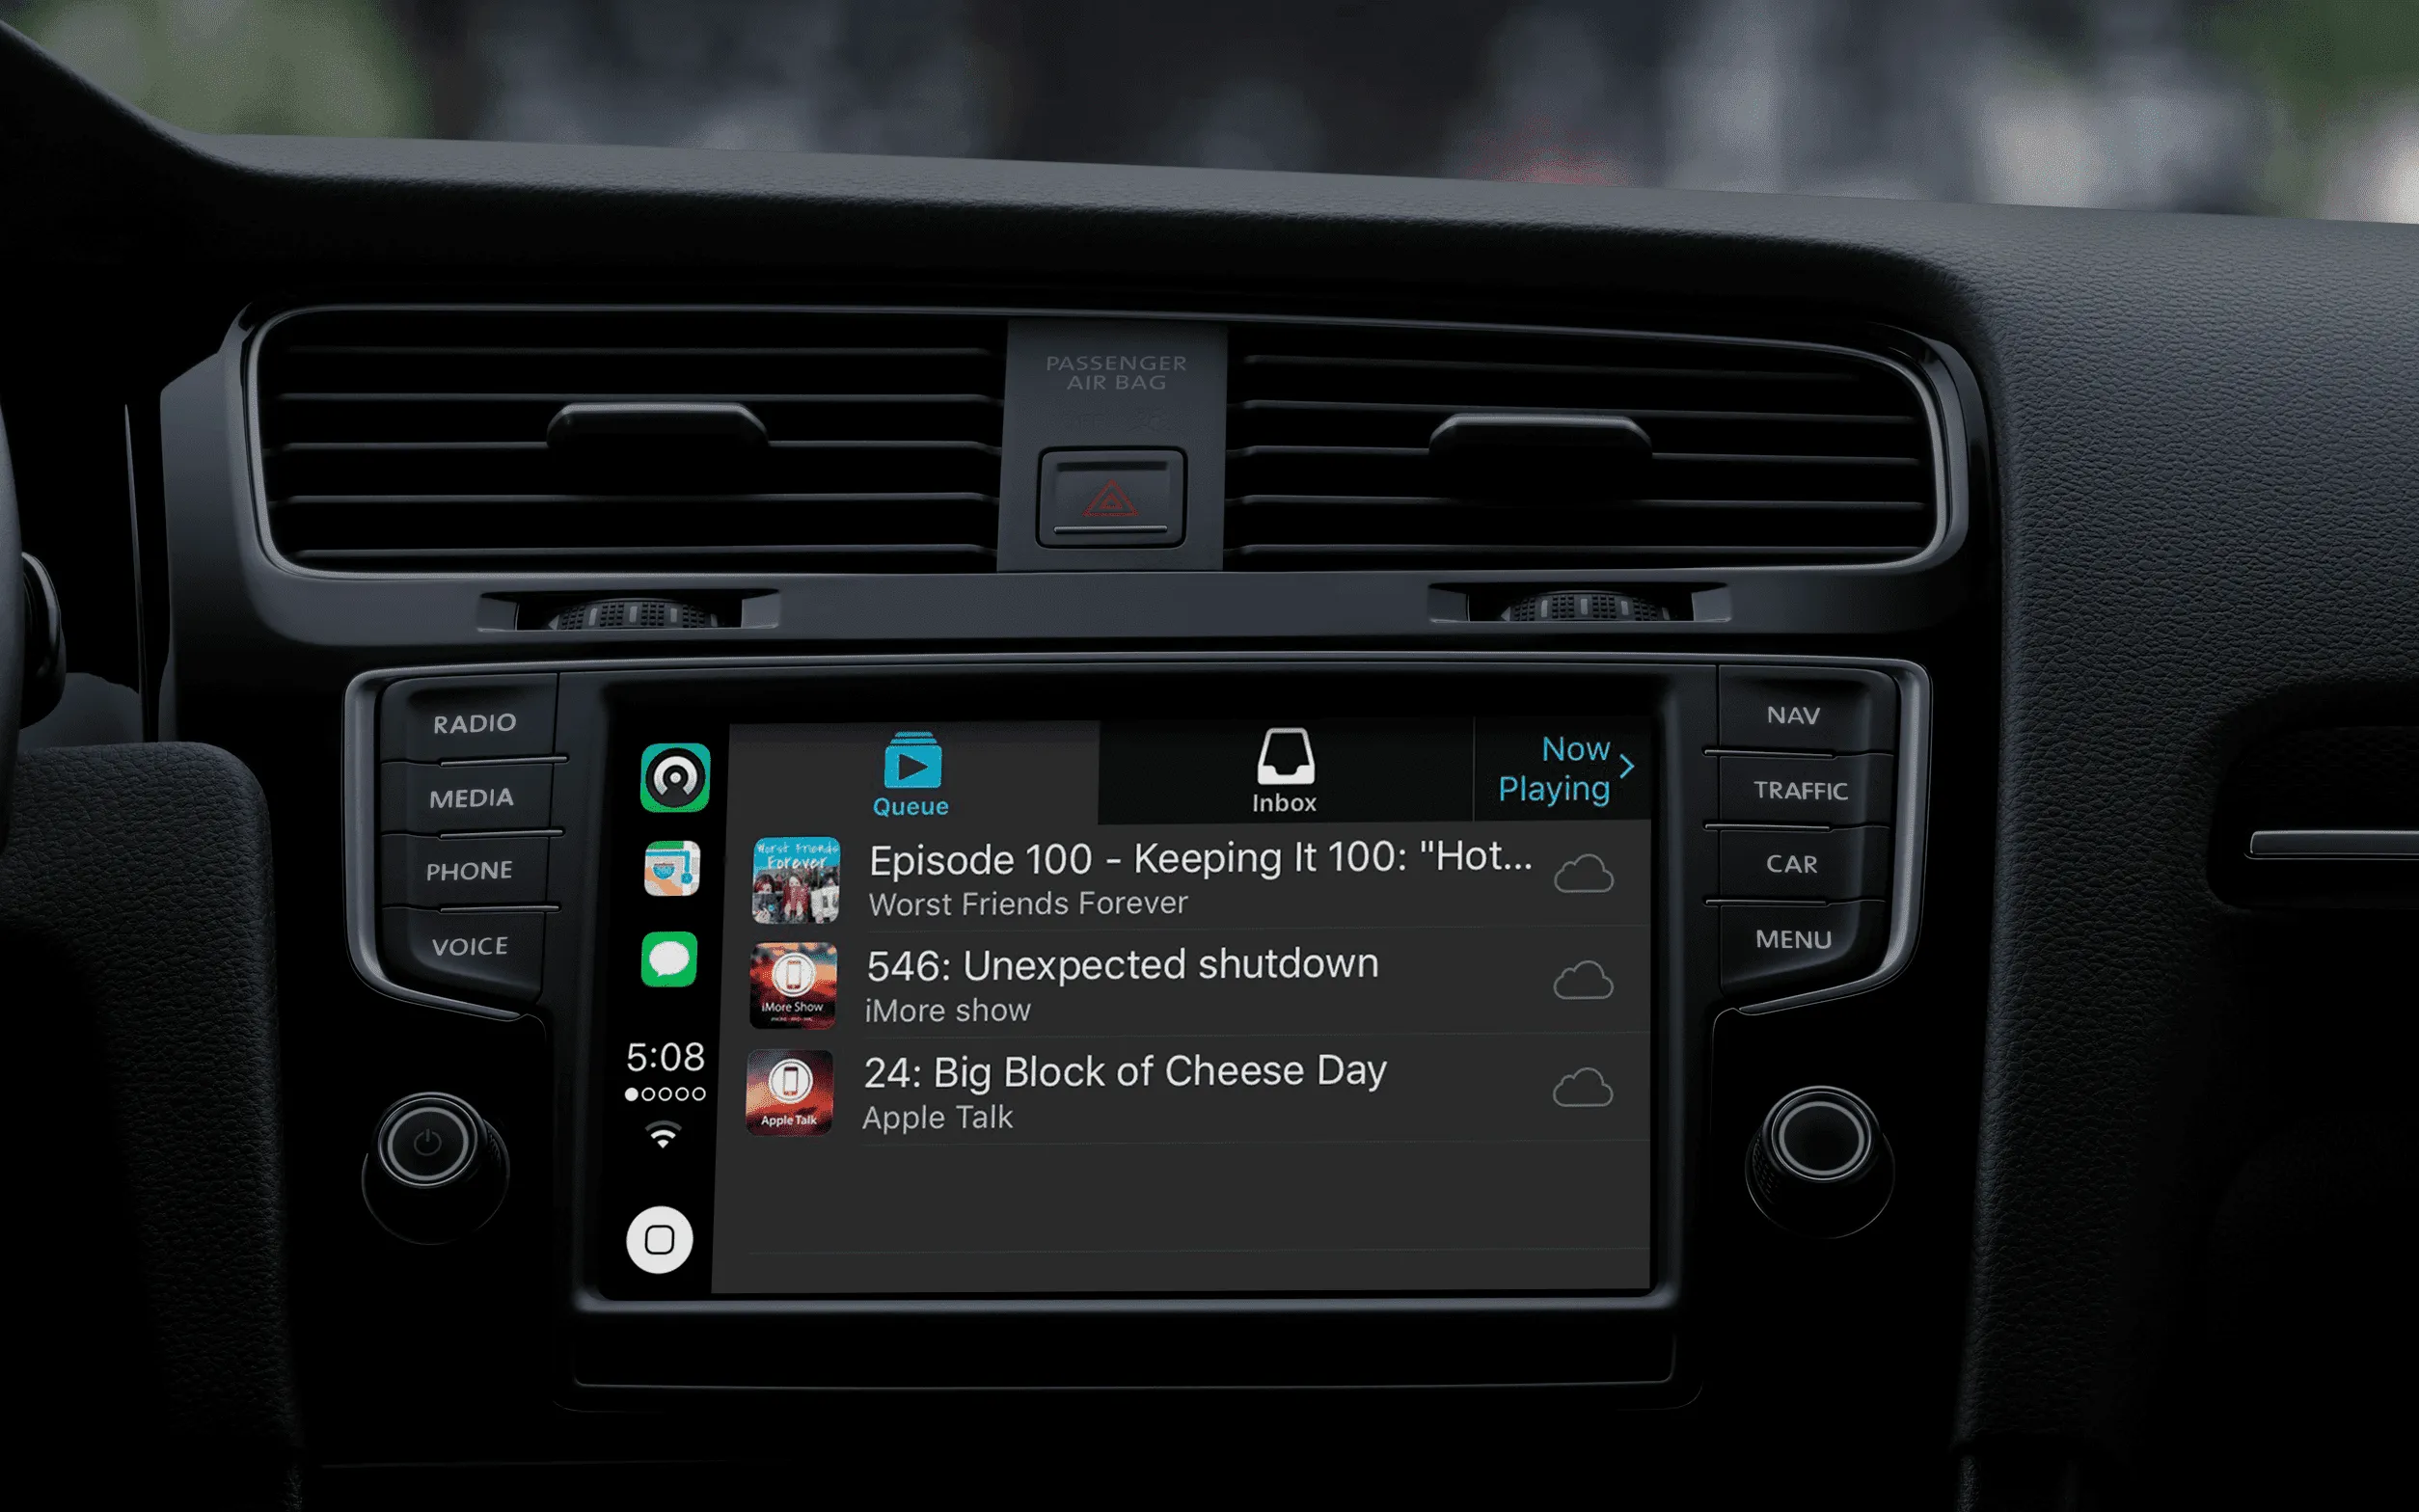 Apps supported by apple CarPlay: Castro